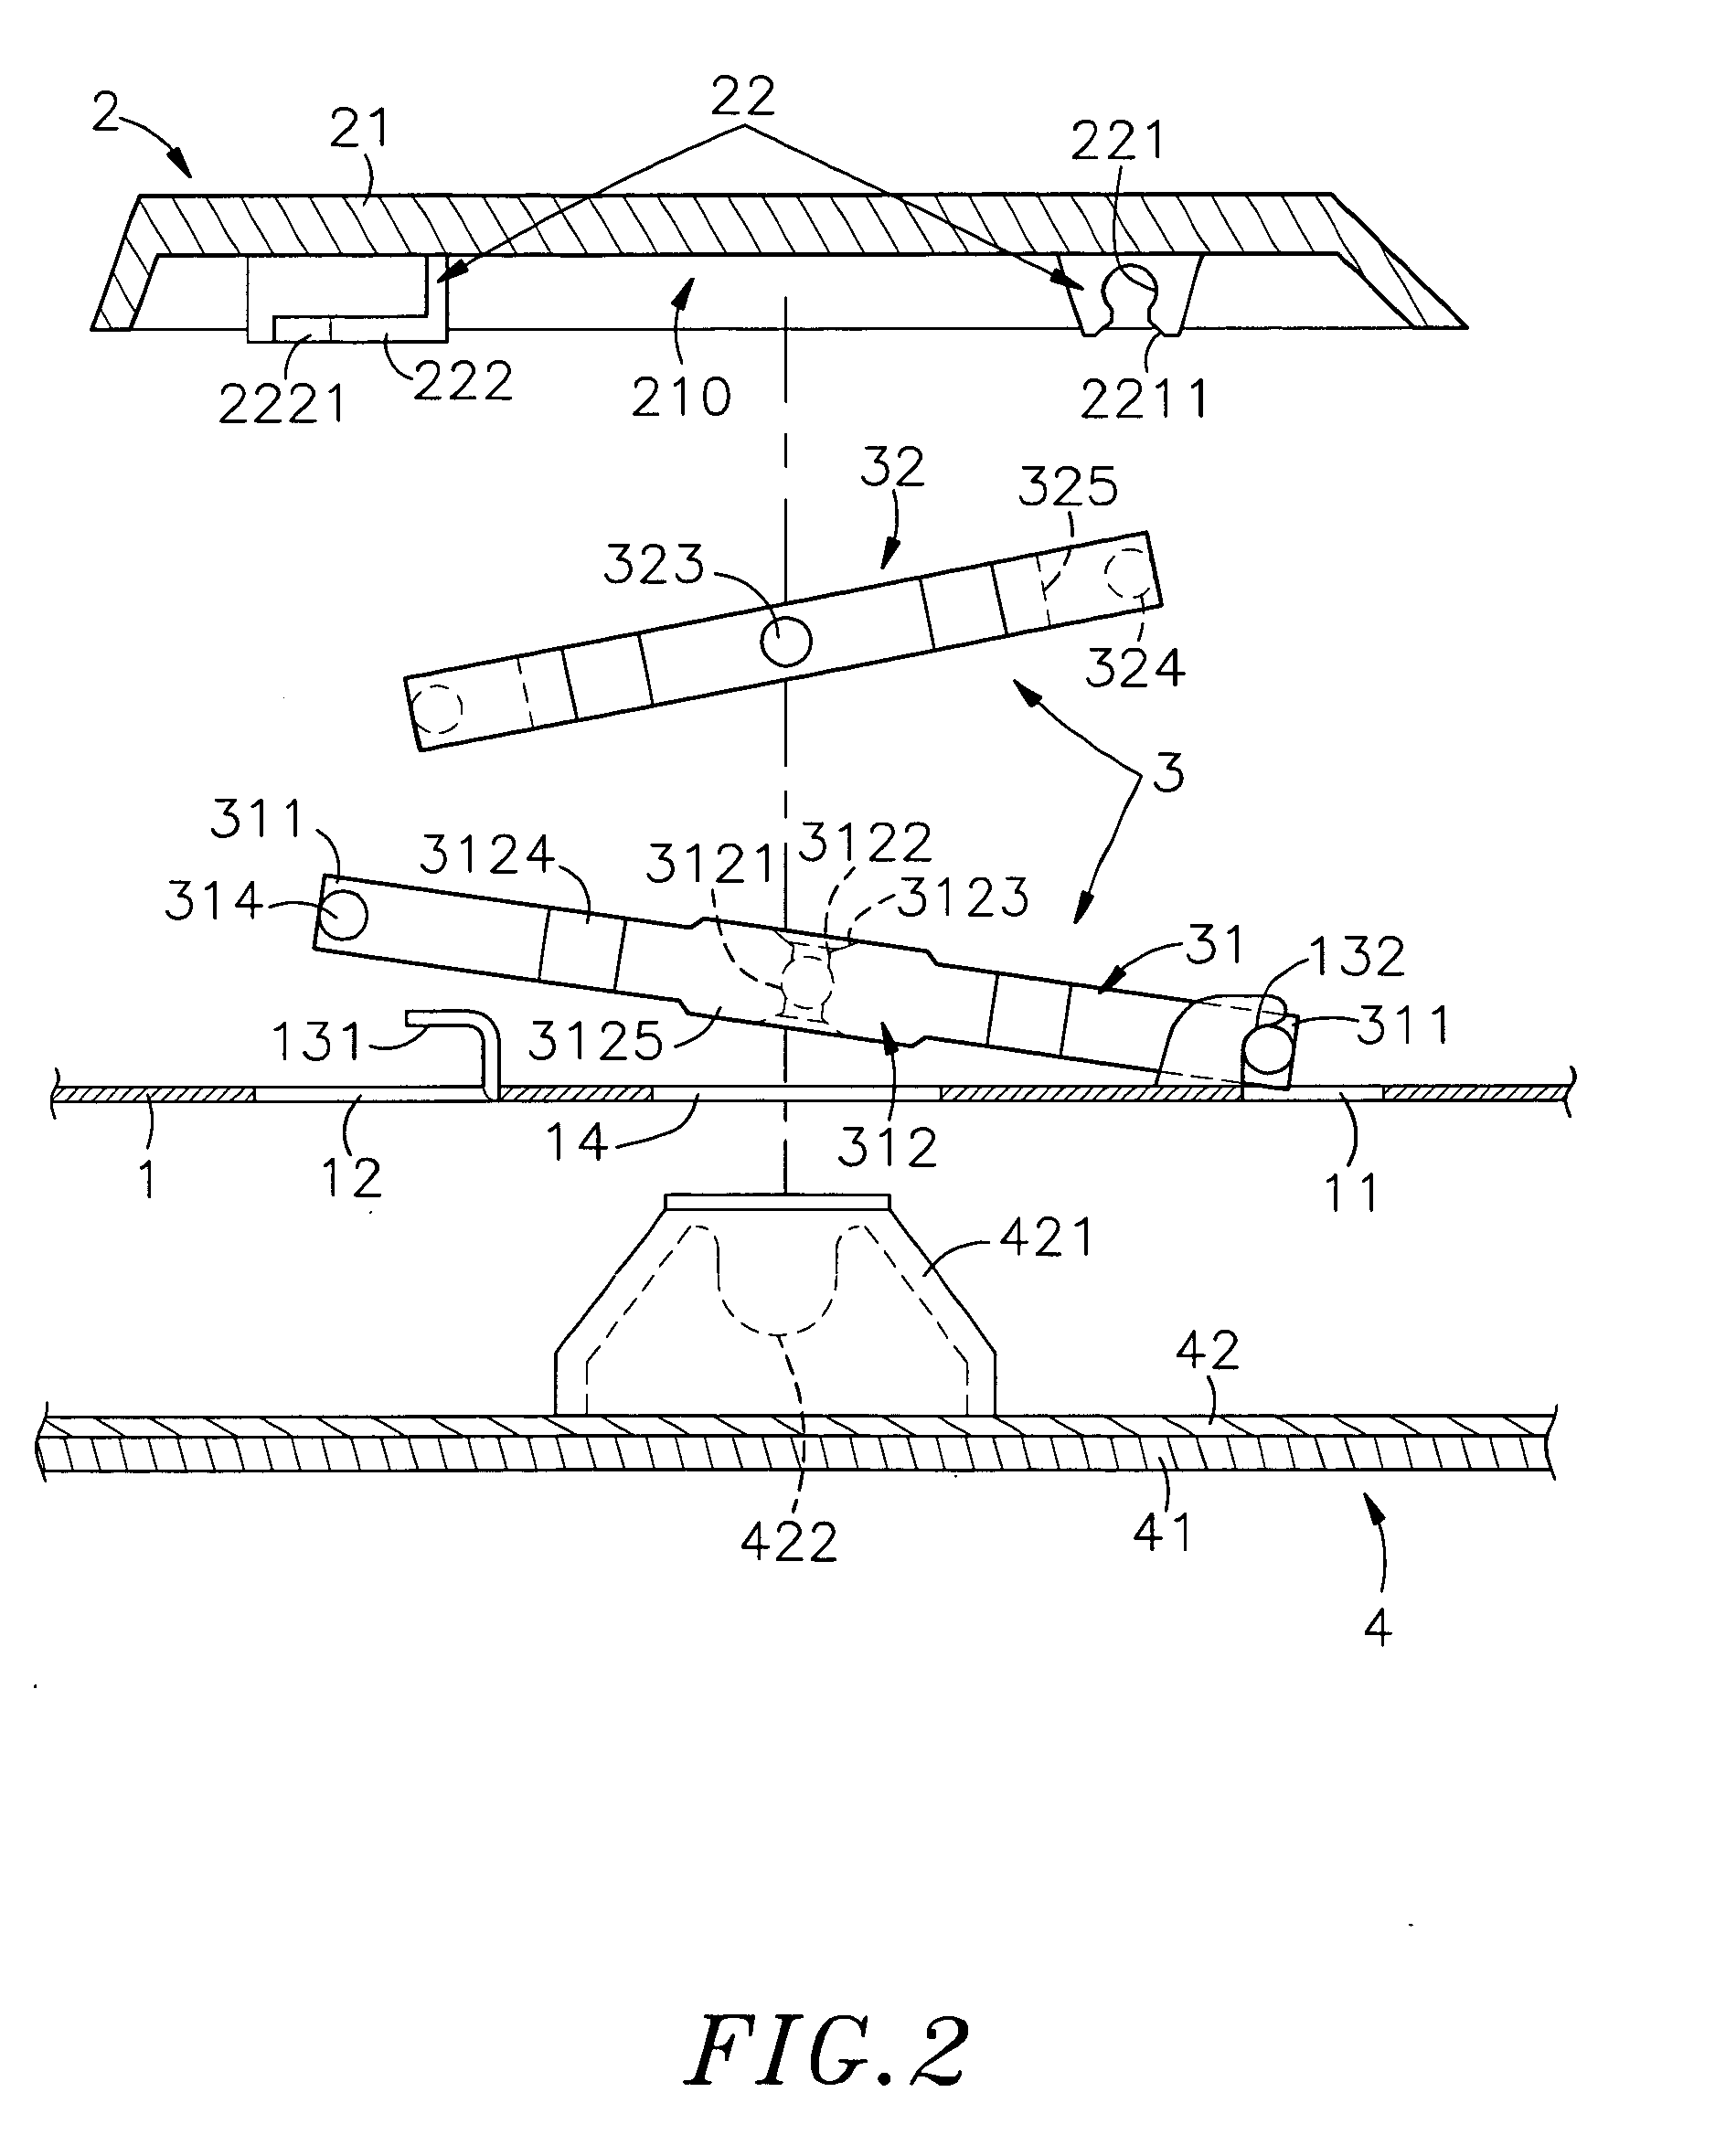 Linking mechanism for key switch assembly